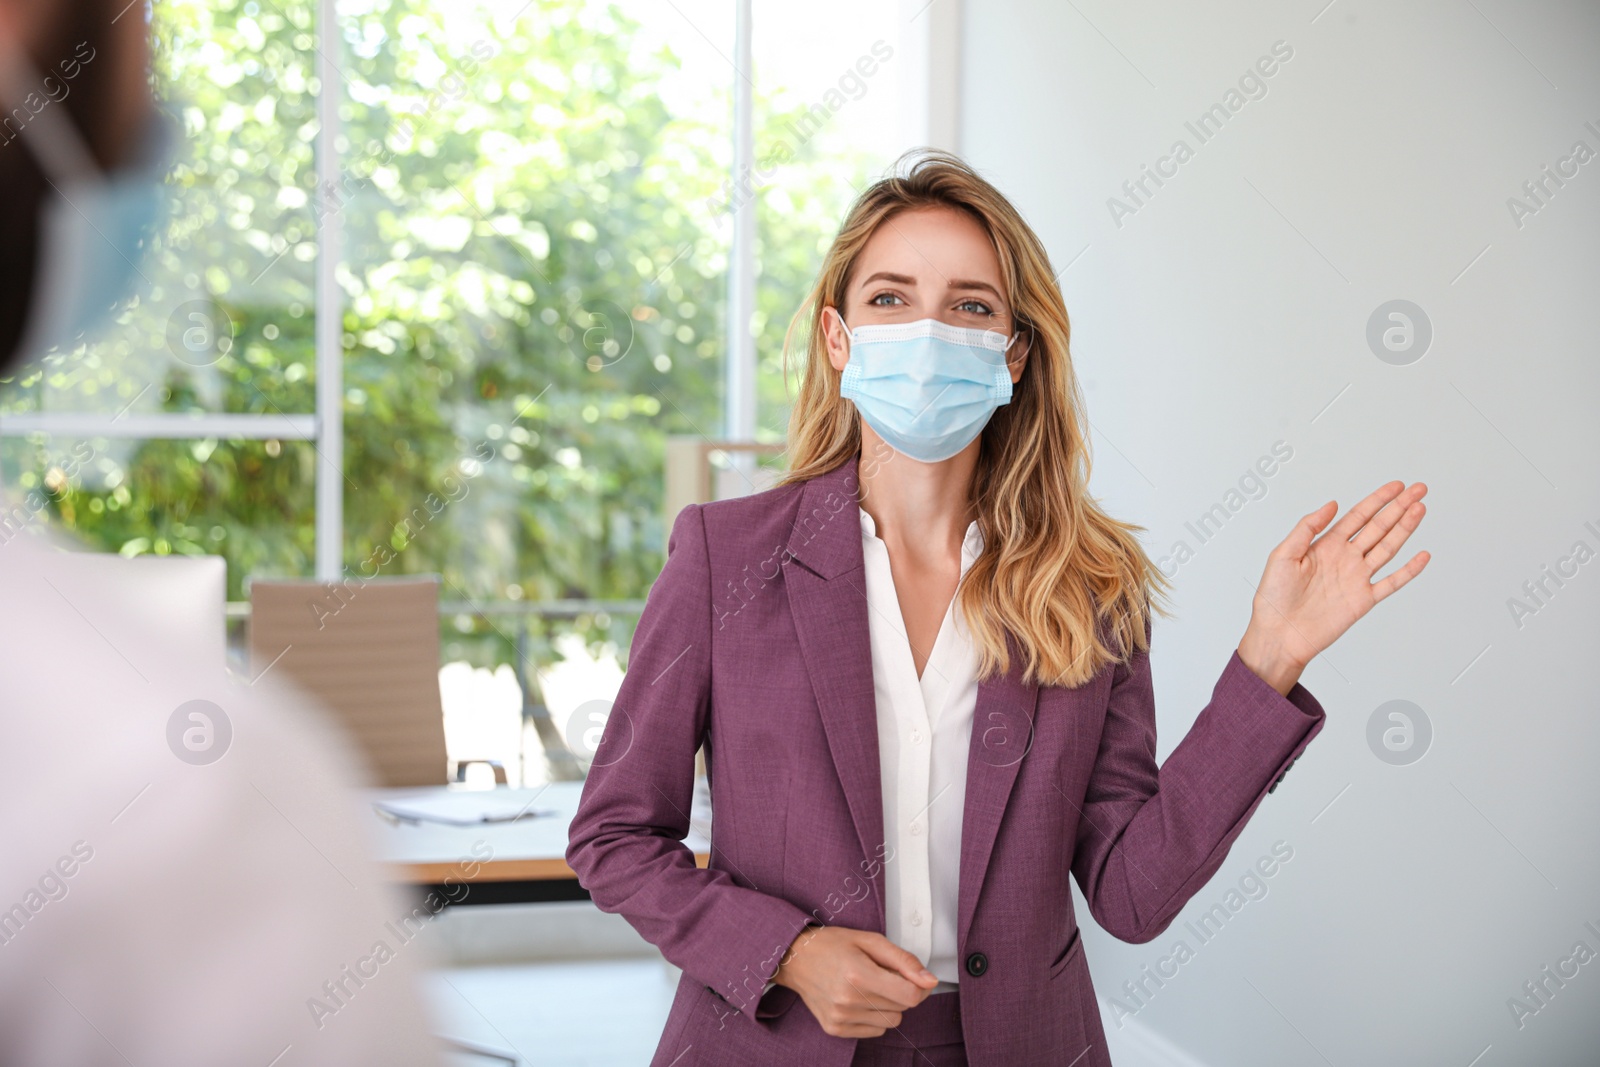 Photo of Woman in protective mask saying hello in office. Keeping social distance during coronavirus pandemic